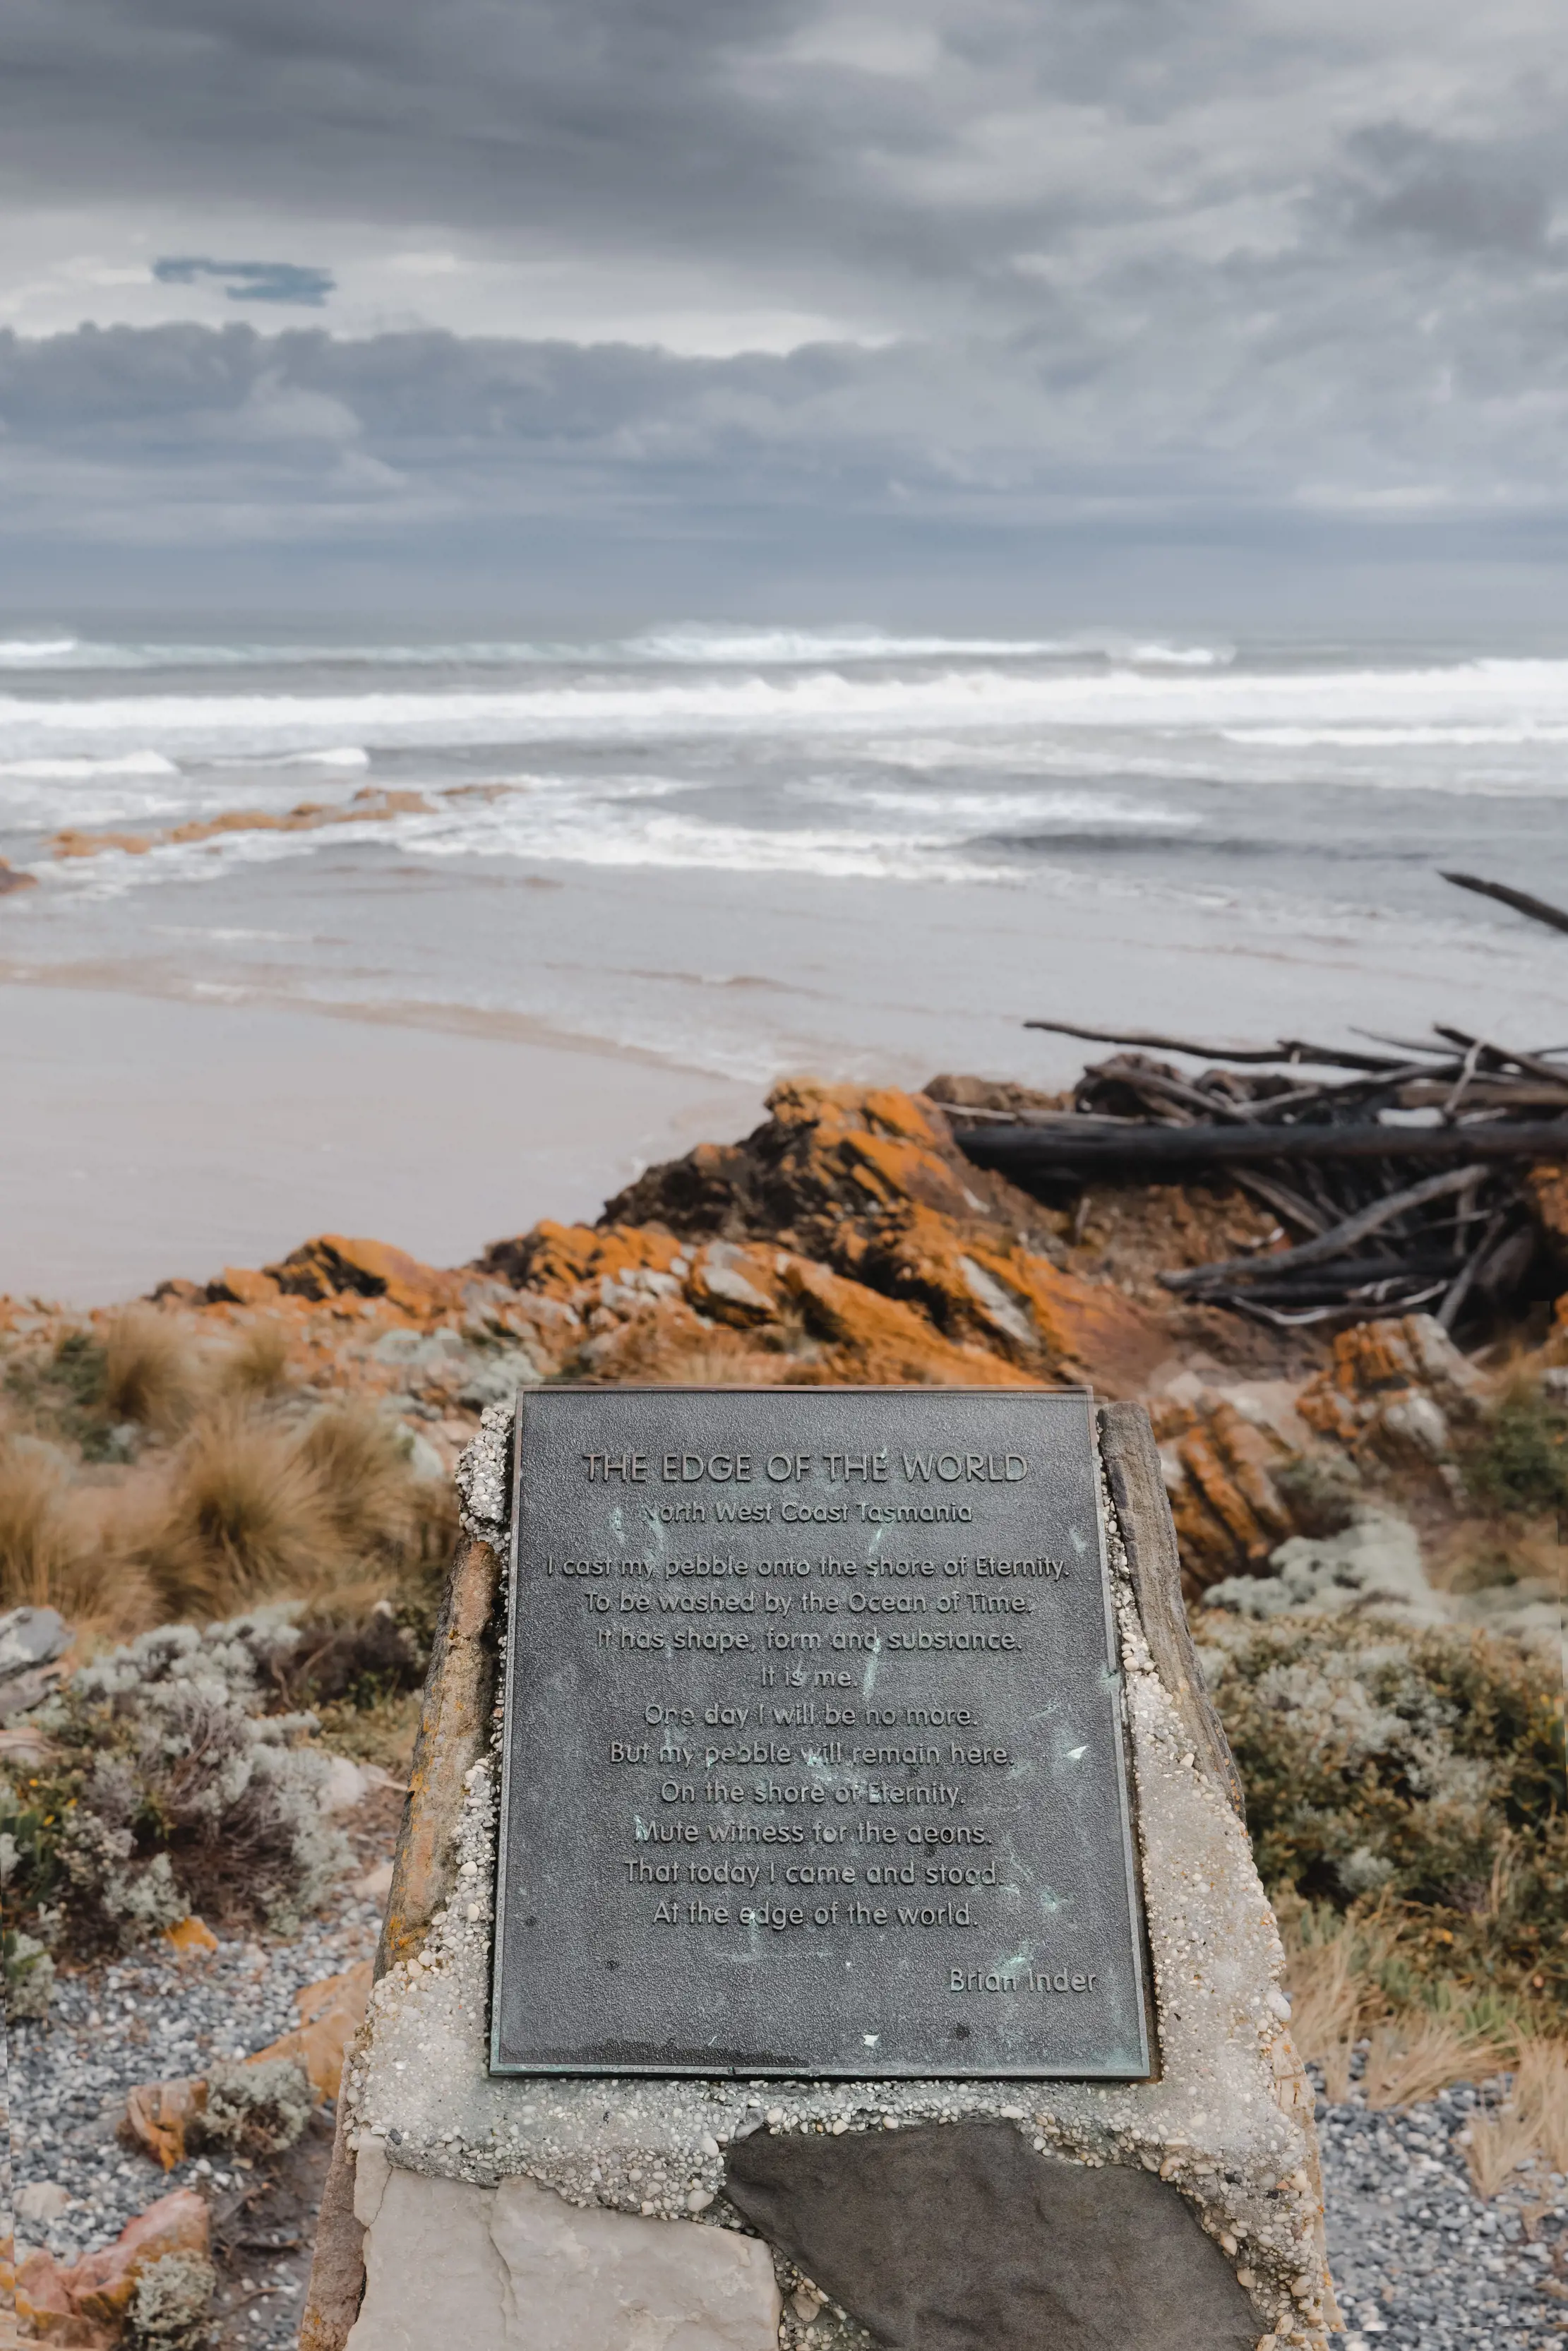 A plaque labelling "Edge of the World" in the bottom centre of the image with the ocean in the background.